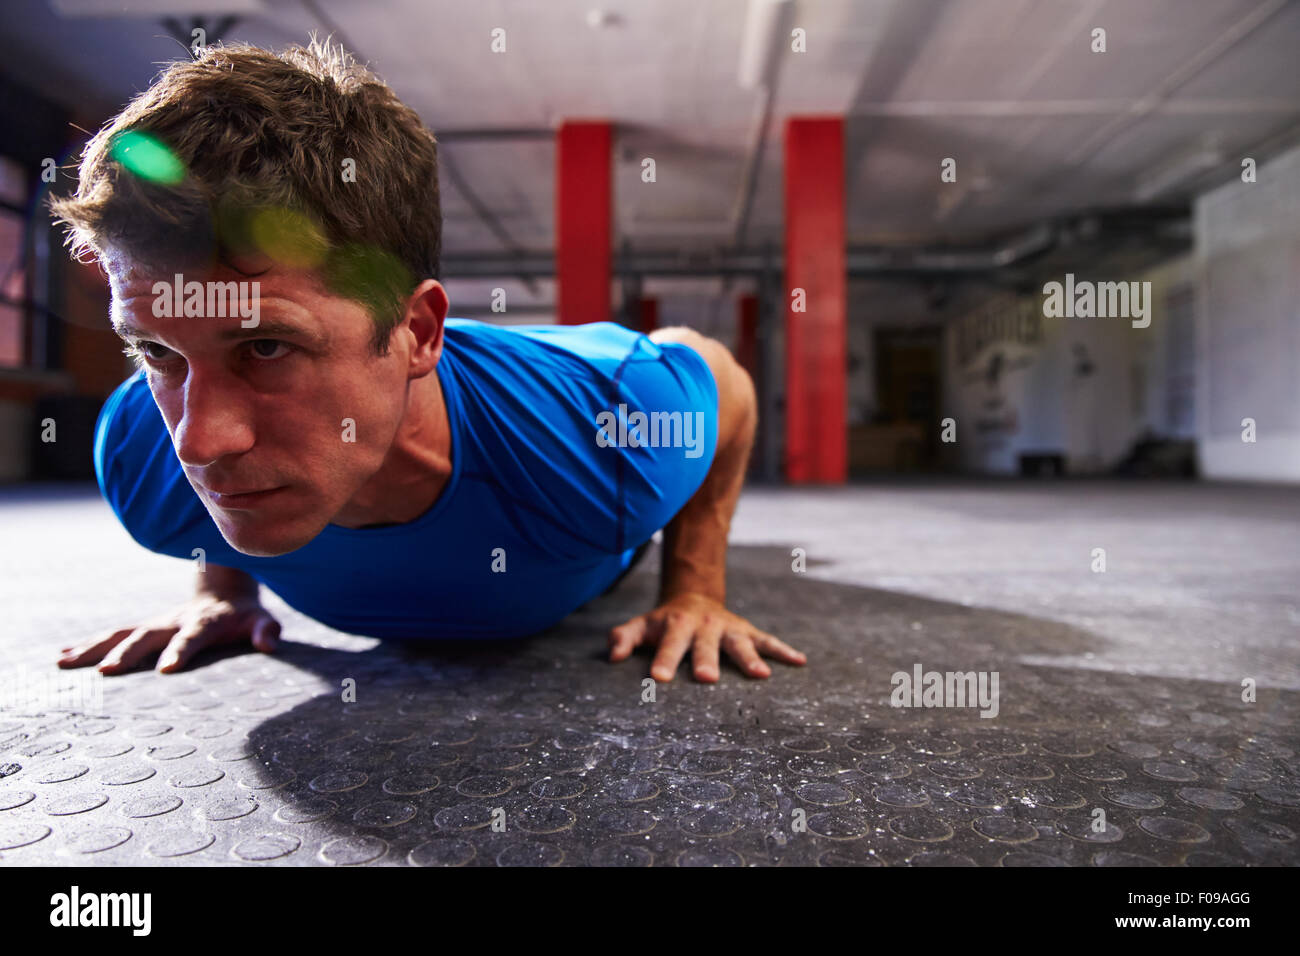 Man In Gym Doing Press-Ups Stock Photo